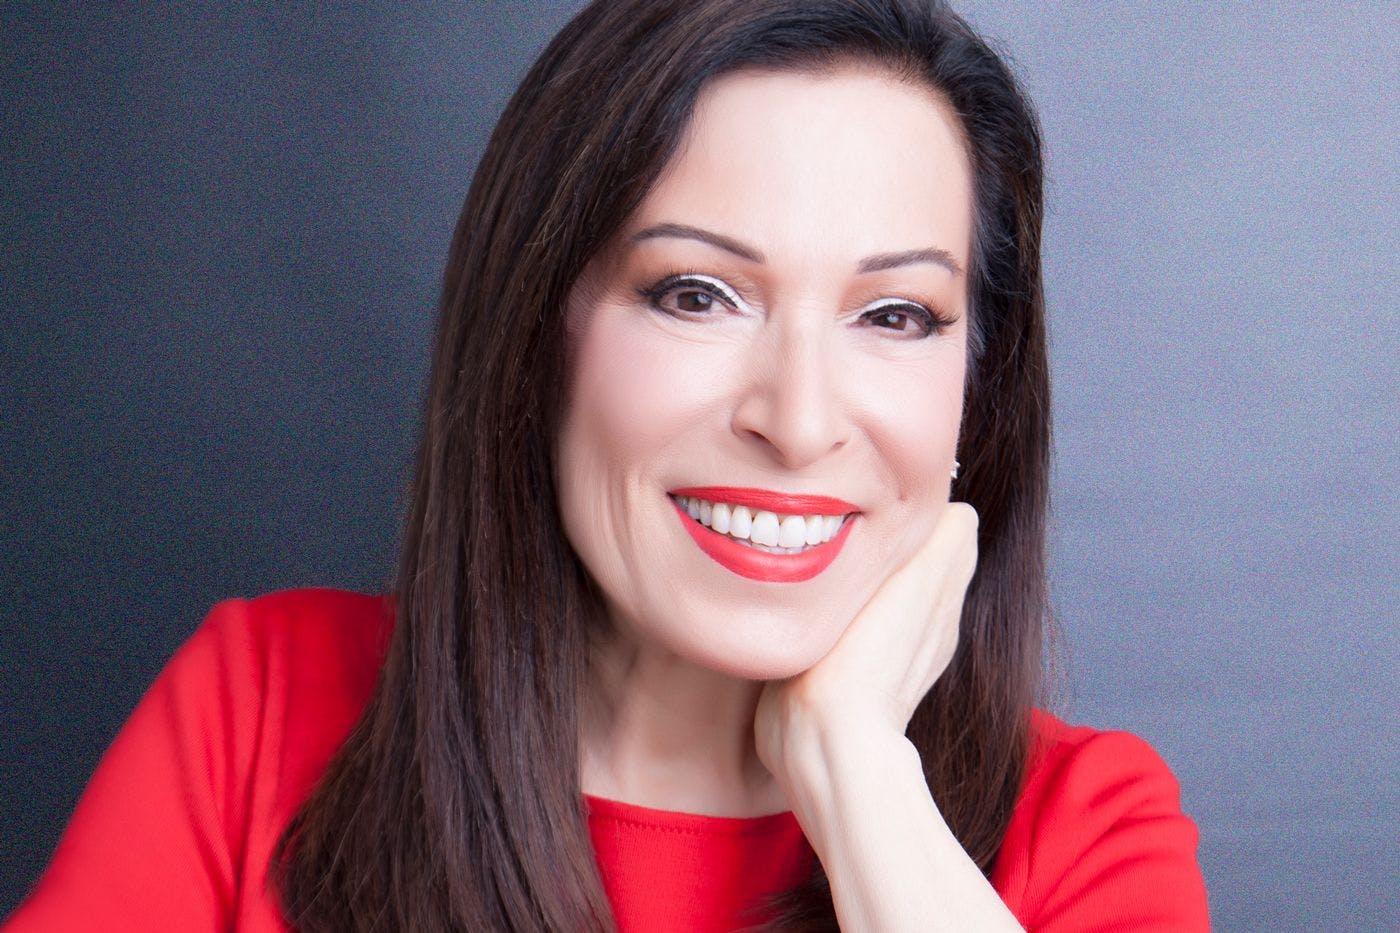 7 skincare truths from worldrenowned beauty expert Paula Begoun